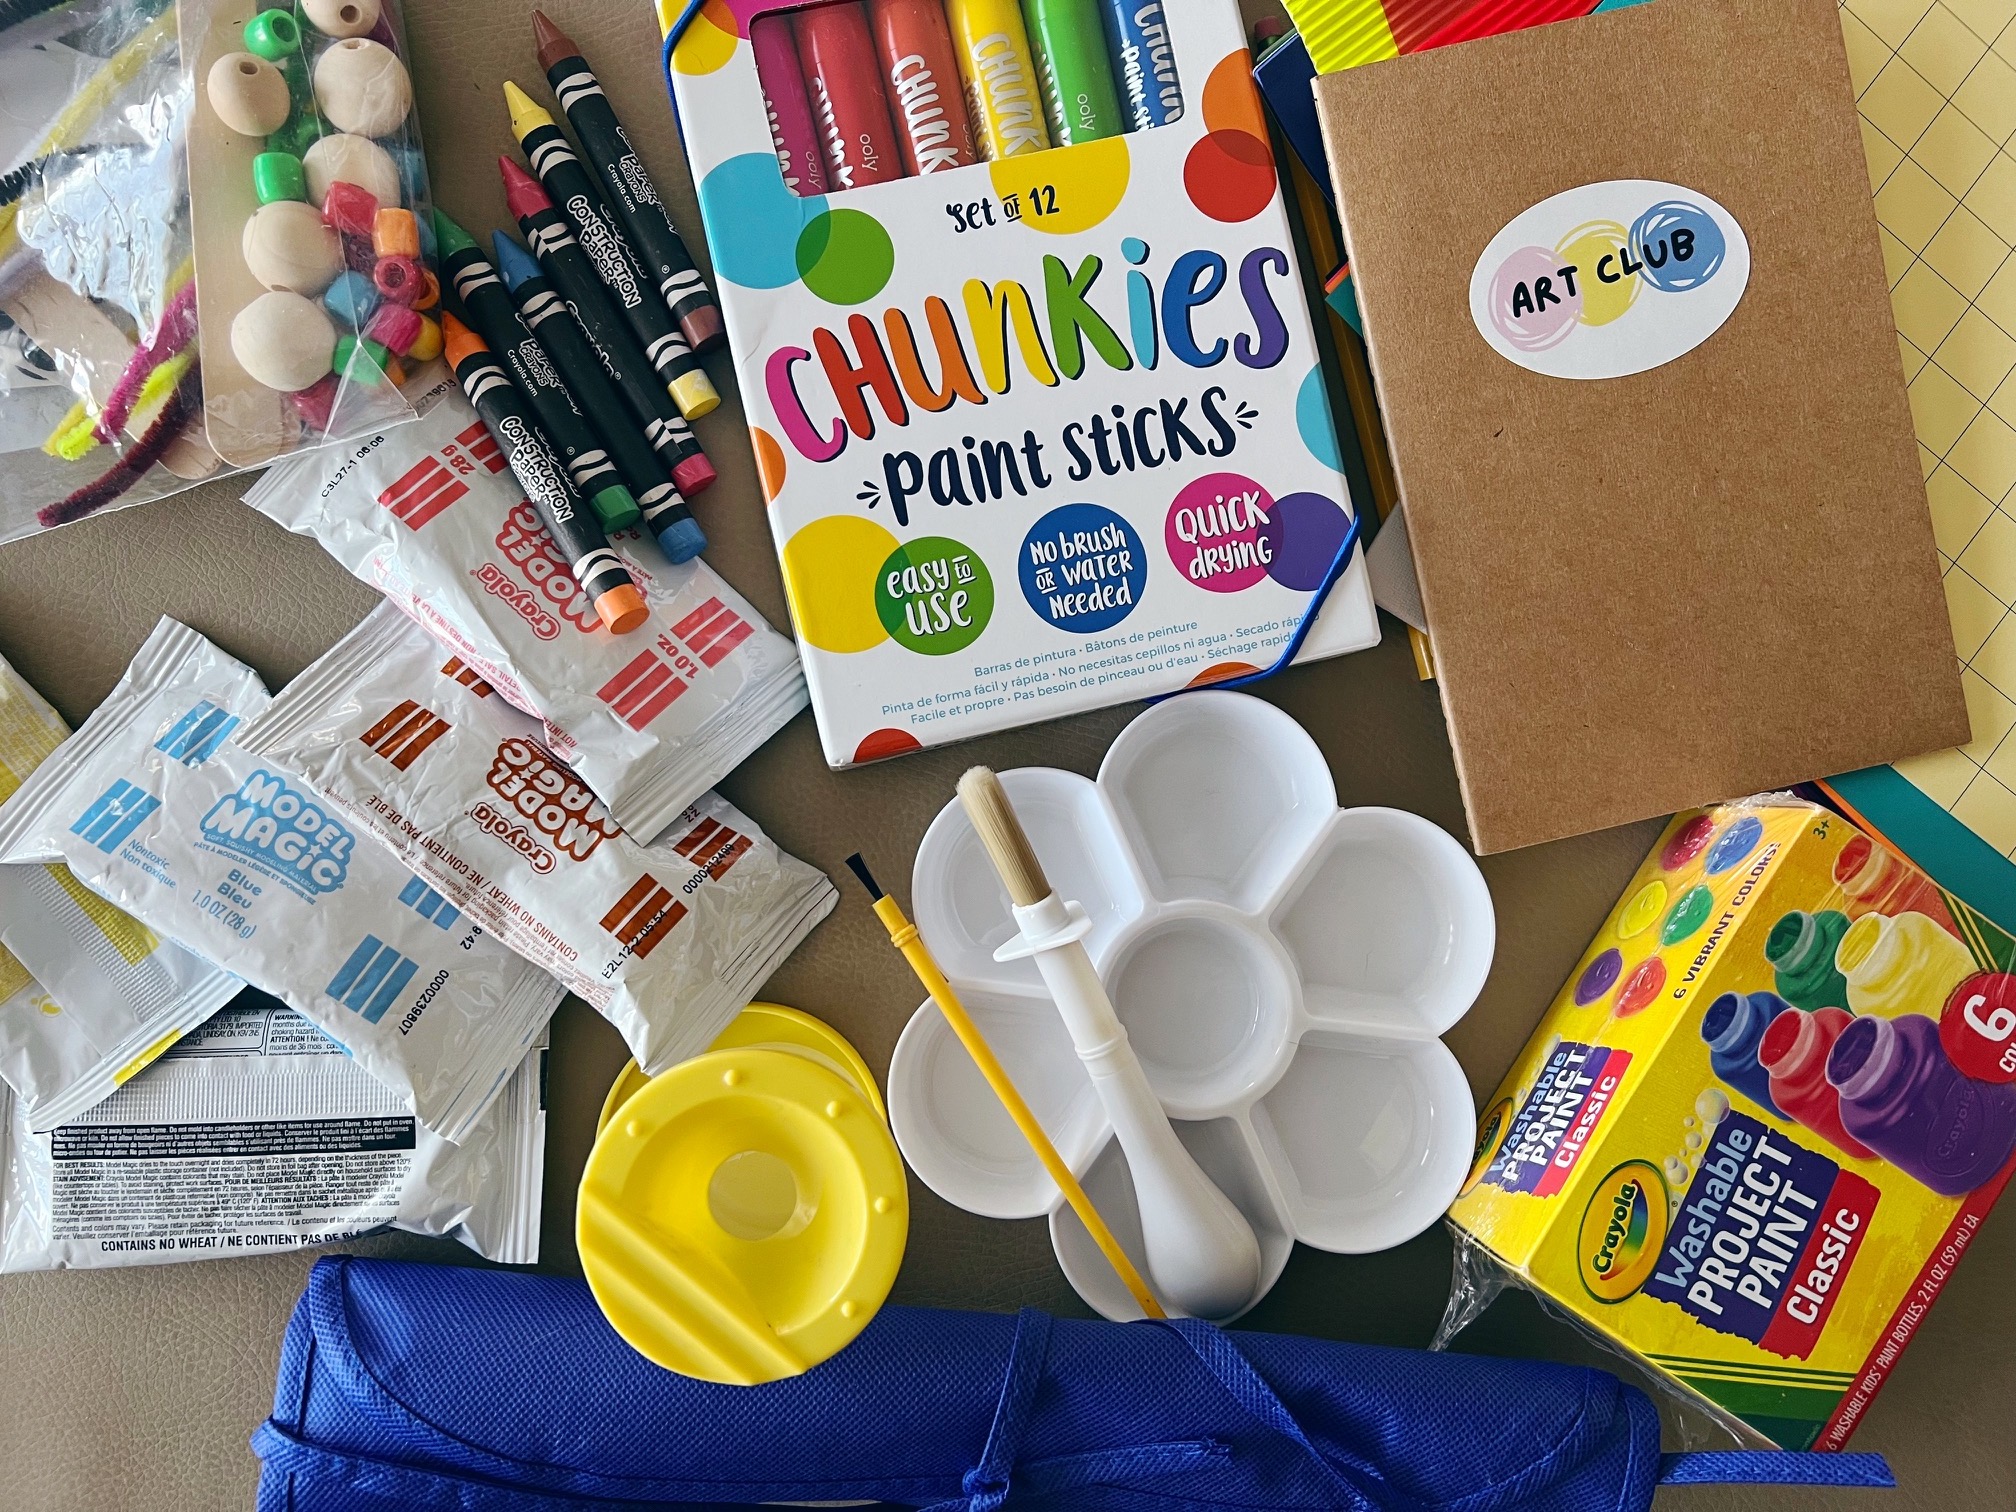 No-Spill Round Paint Cups with Colored Lids - Creativity Street